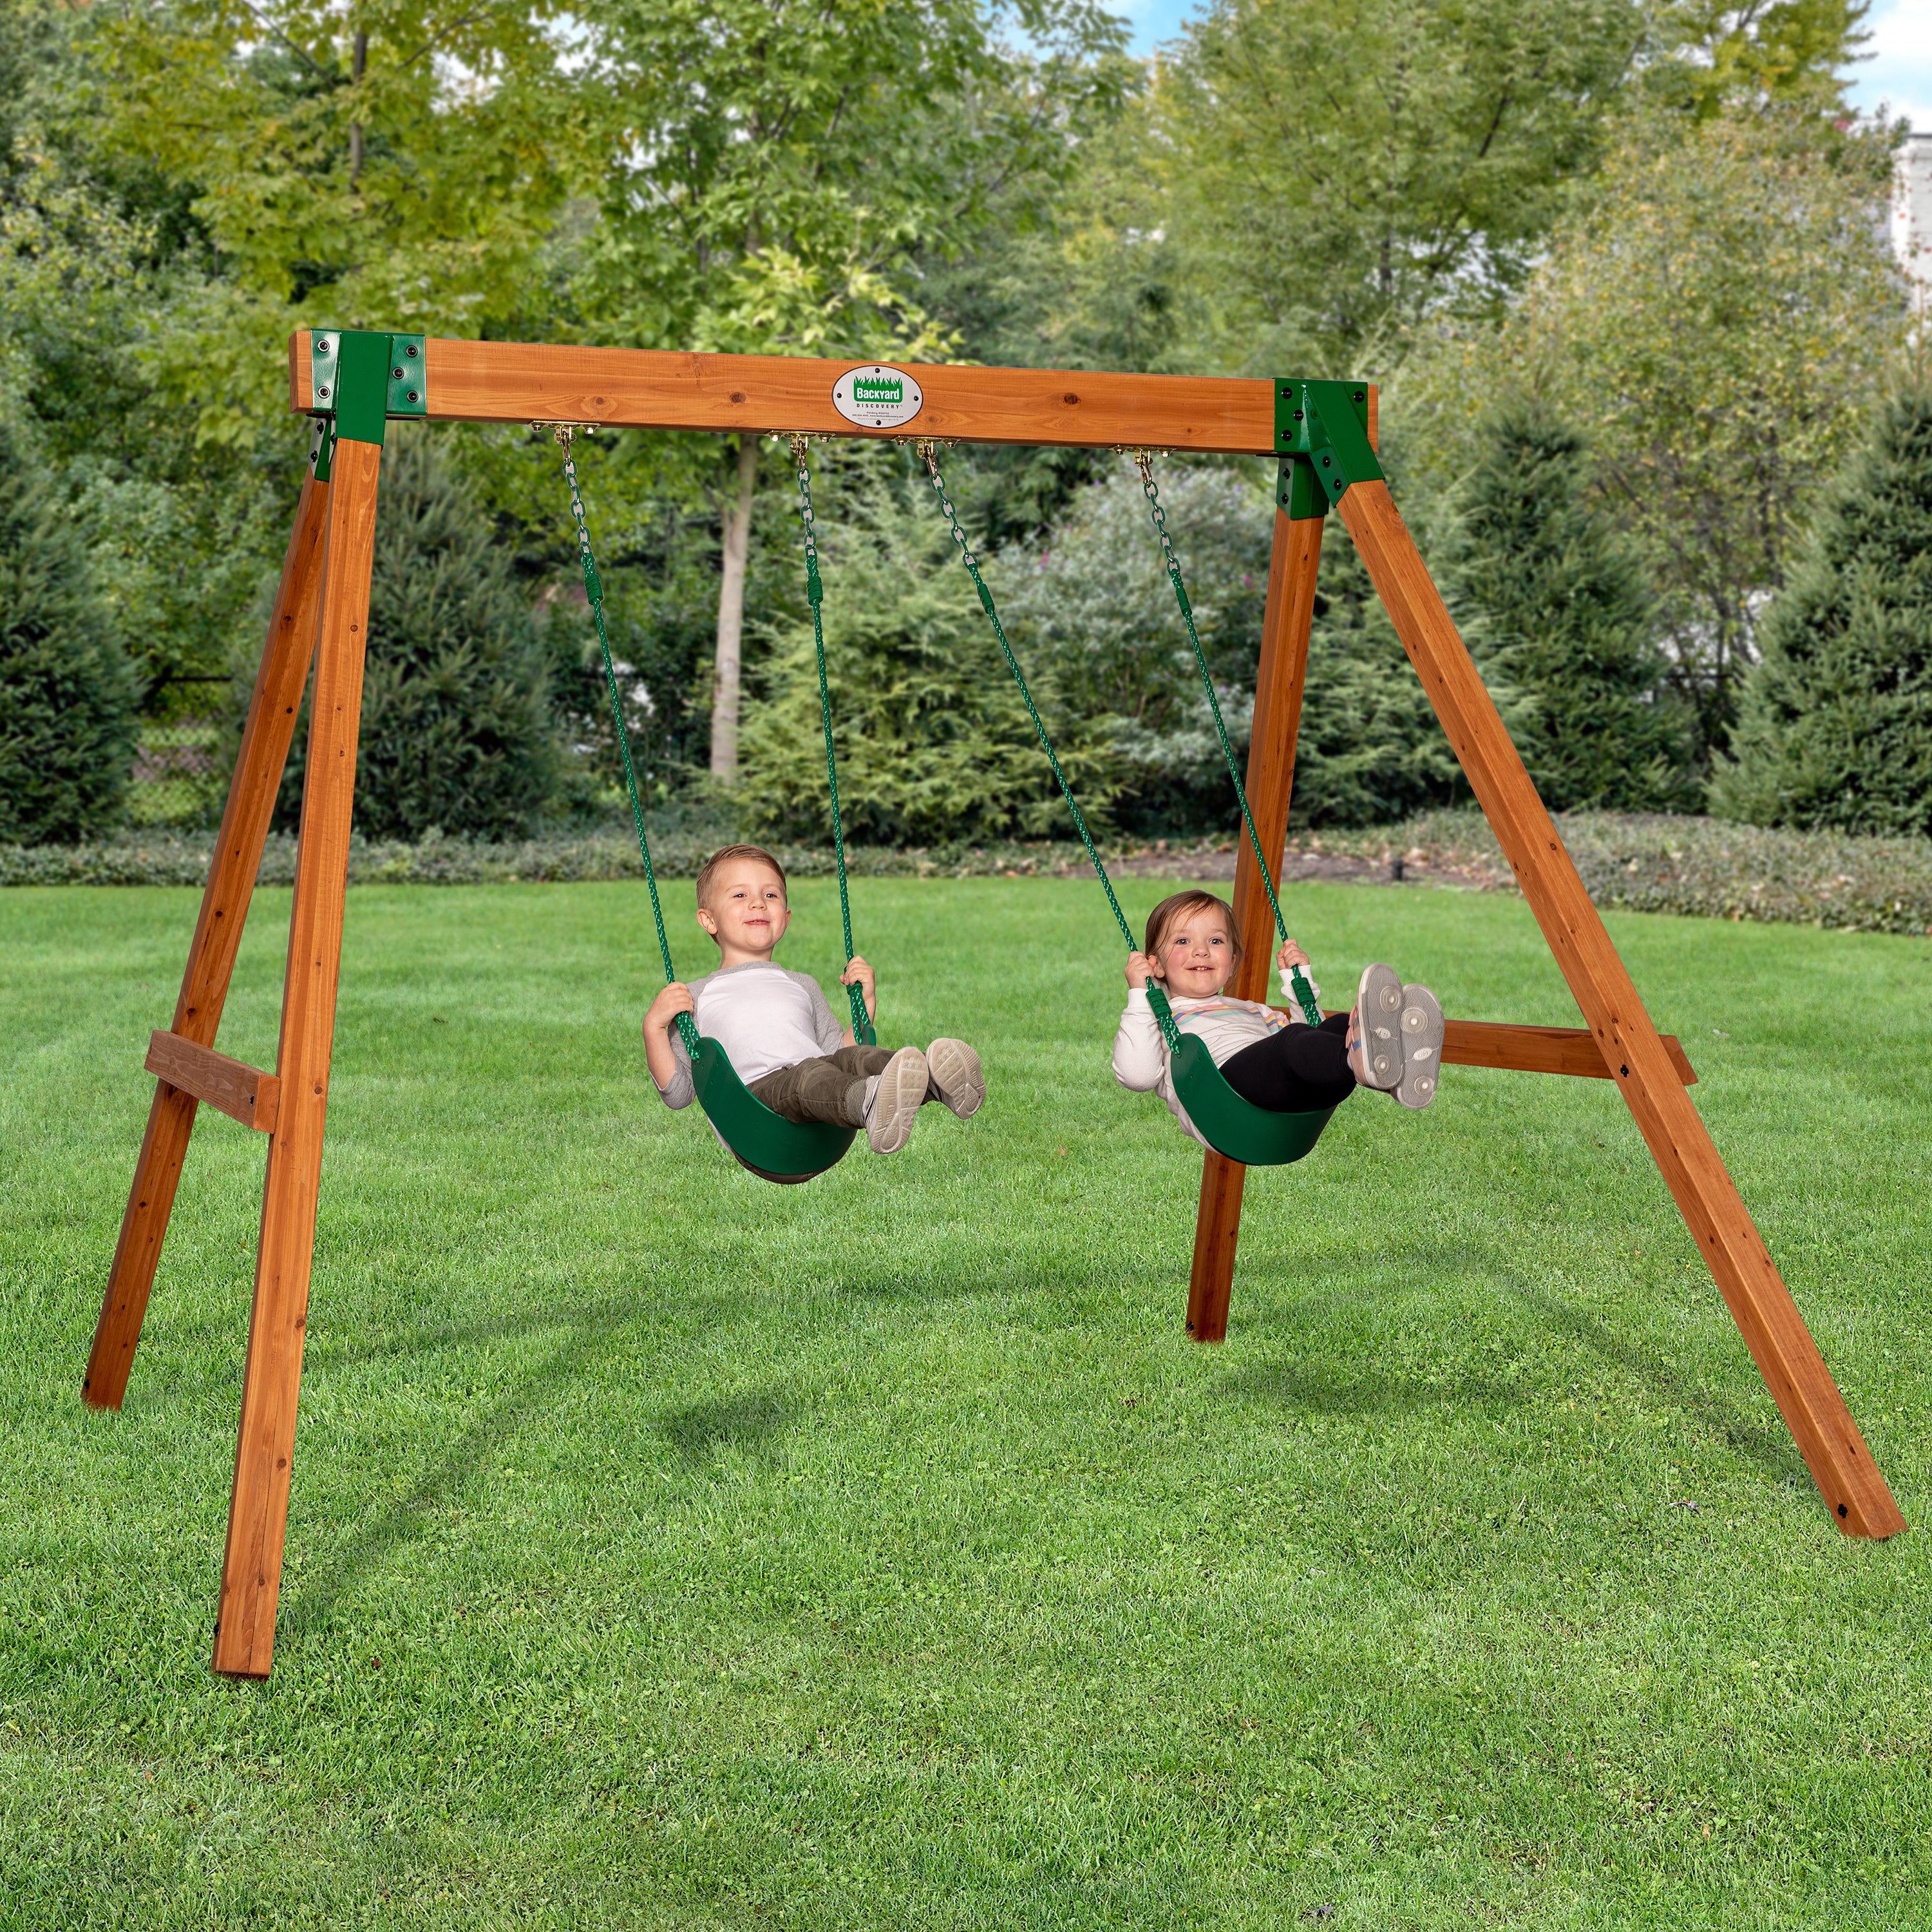 How to get rid of old swing set